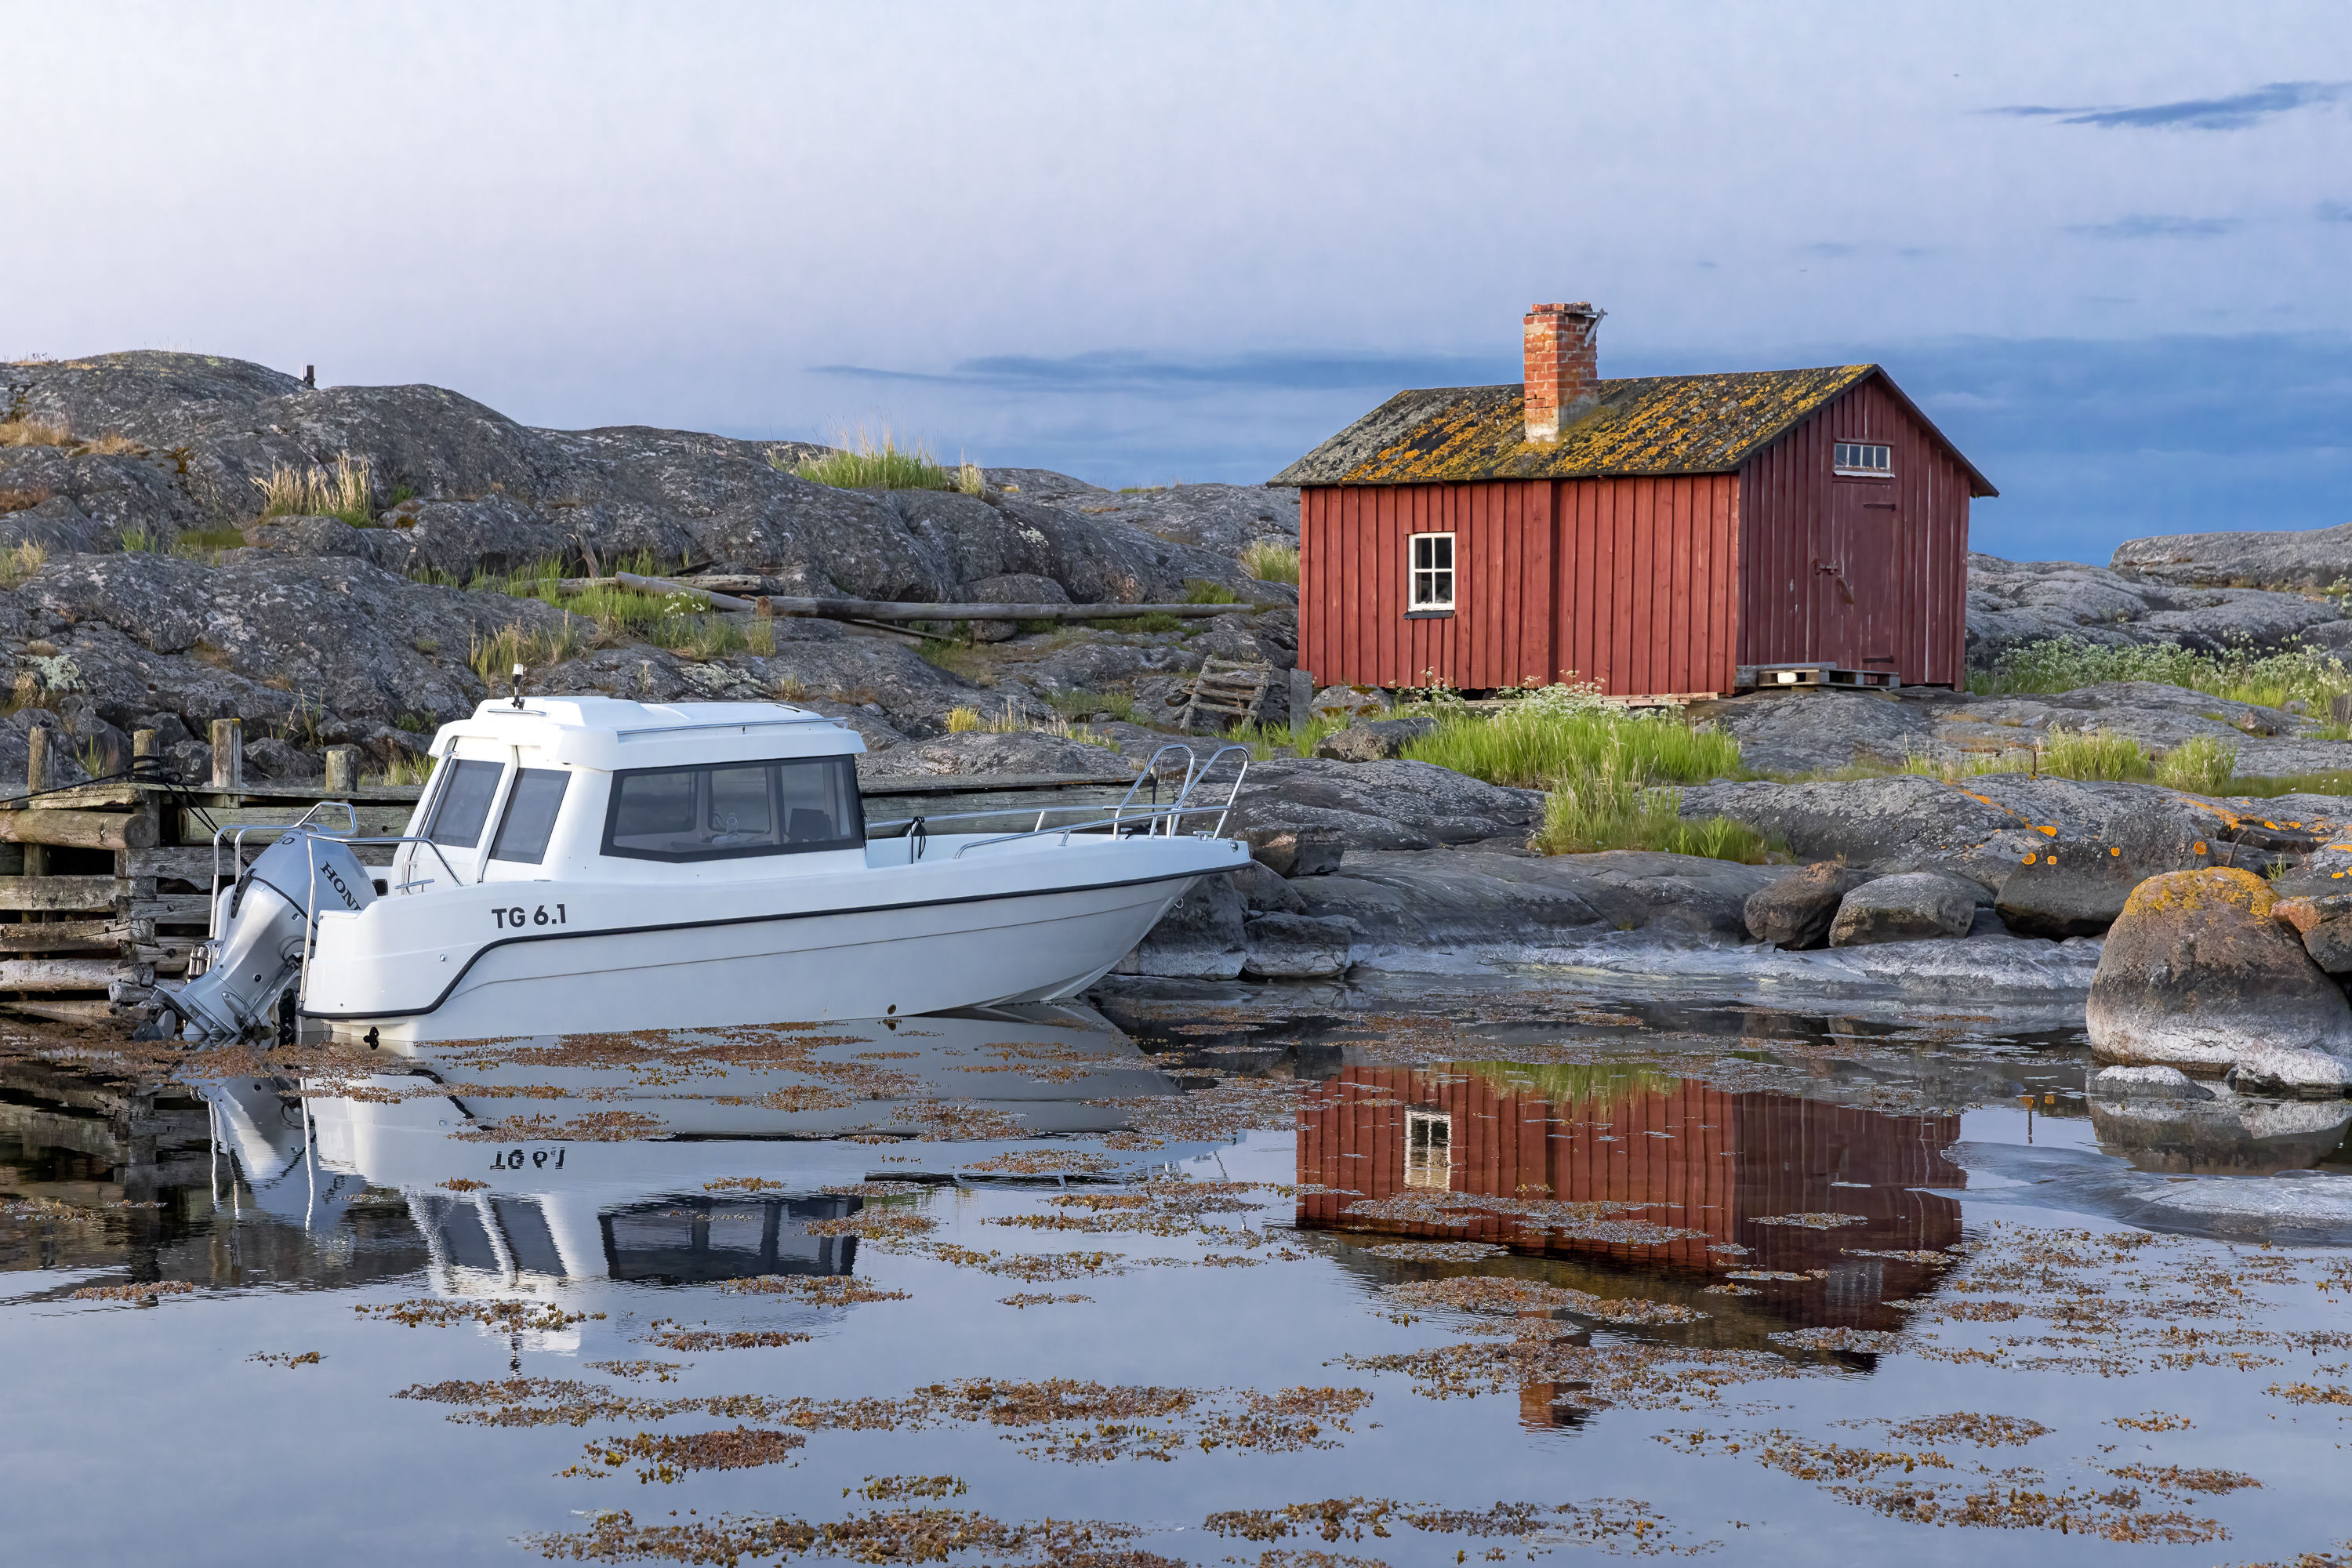 TG 6.1 cabin boat in the early summer sunset. Old red fishing hut in the distance.